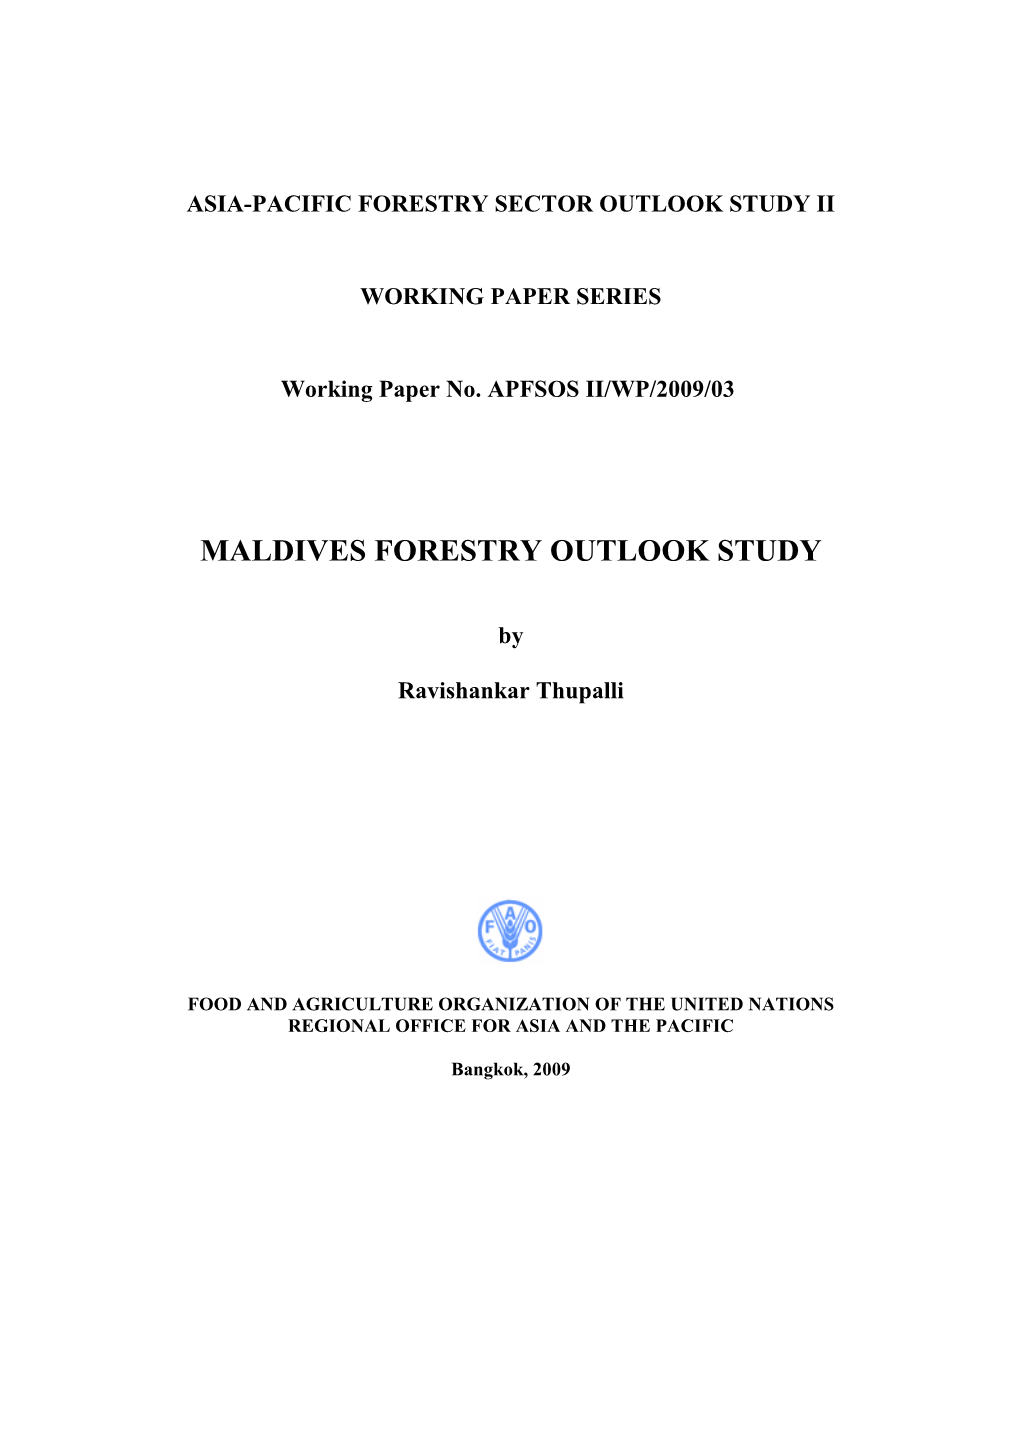 Maldives Forestry Outlook Study